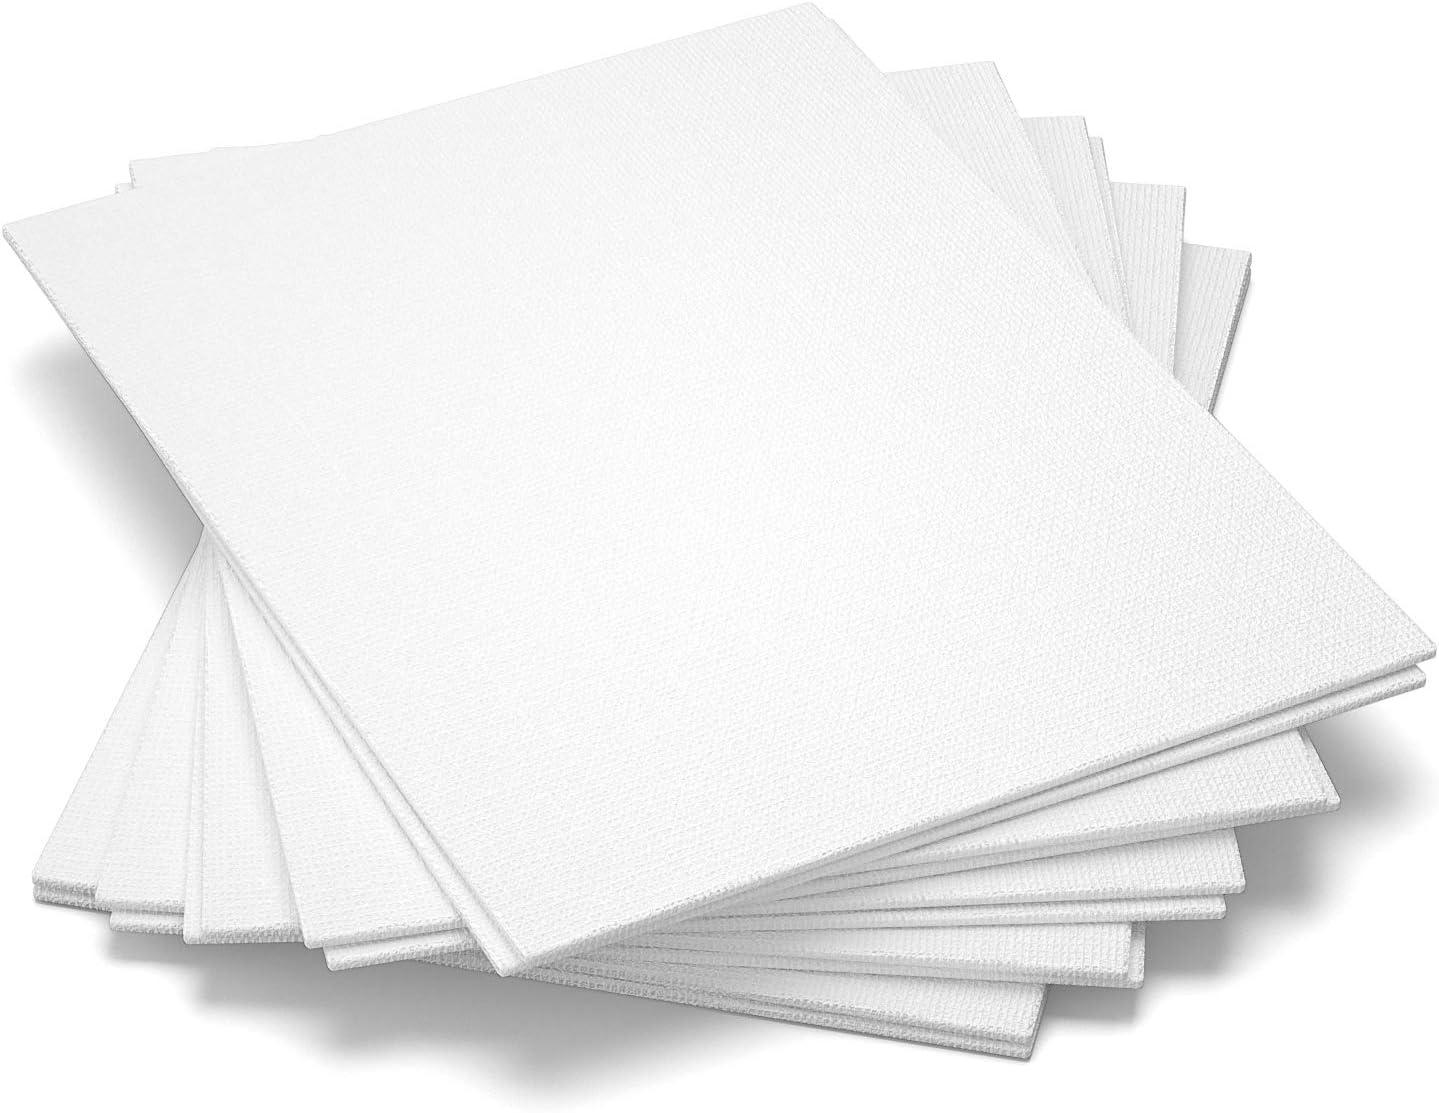 Stretched Canvas 9x12 6 Pack 10 oz. Triple Primed, Professional Artist  White Canvas, 100% Cotton, Art Supplies for Crafts, Gesso-Primed for Oil